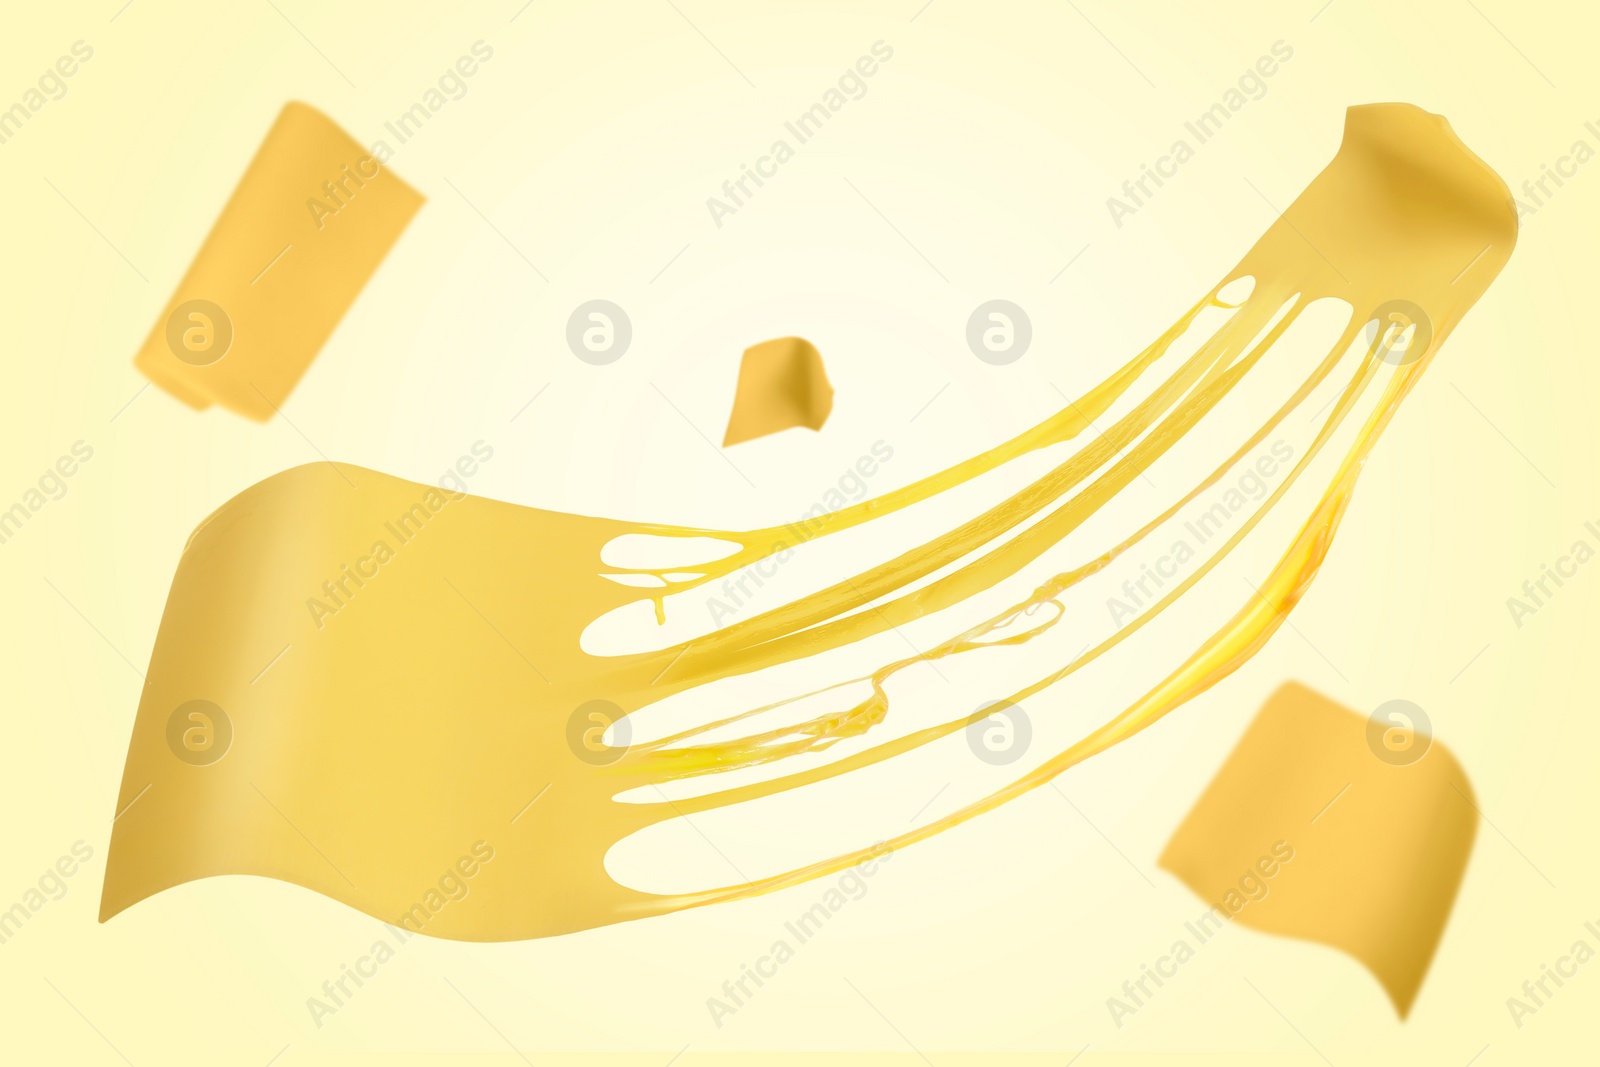 Image of Slices of cheese falling on yellow background